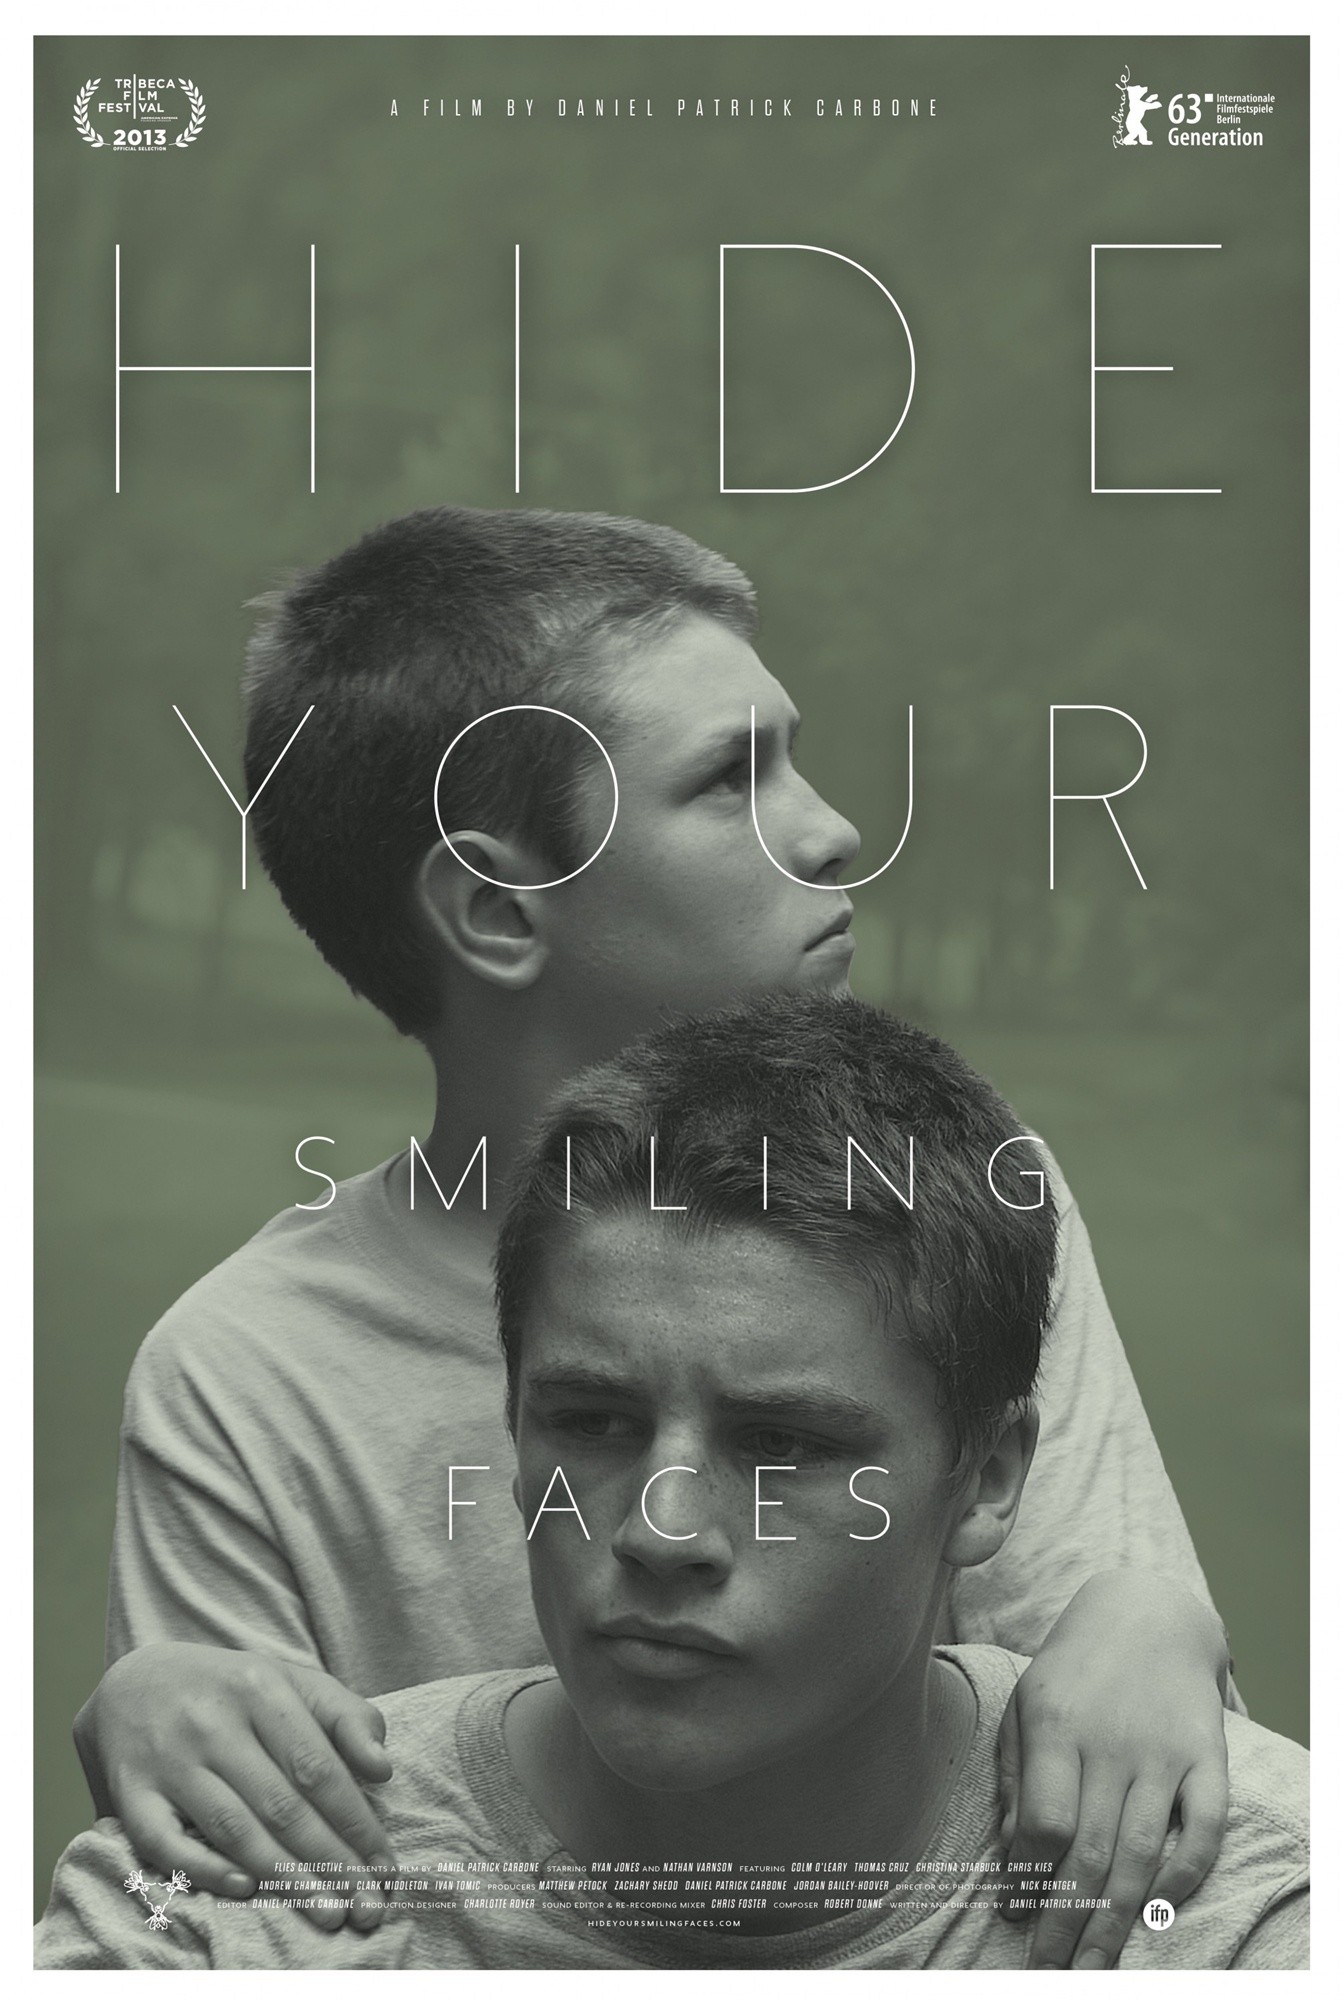 Poster of Tribeca Film's Hide Your Smiling Faces (2014)